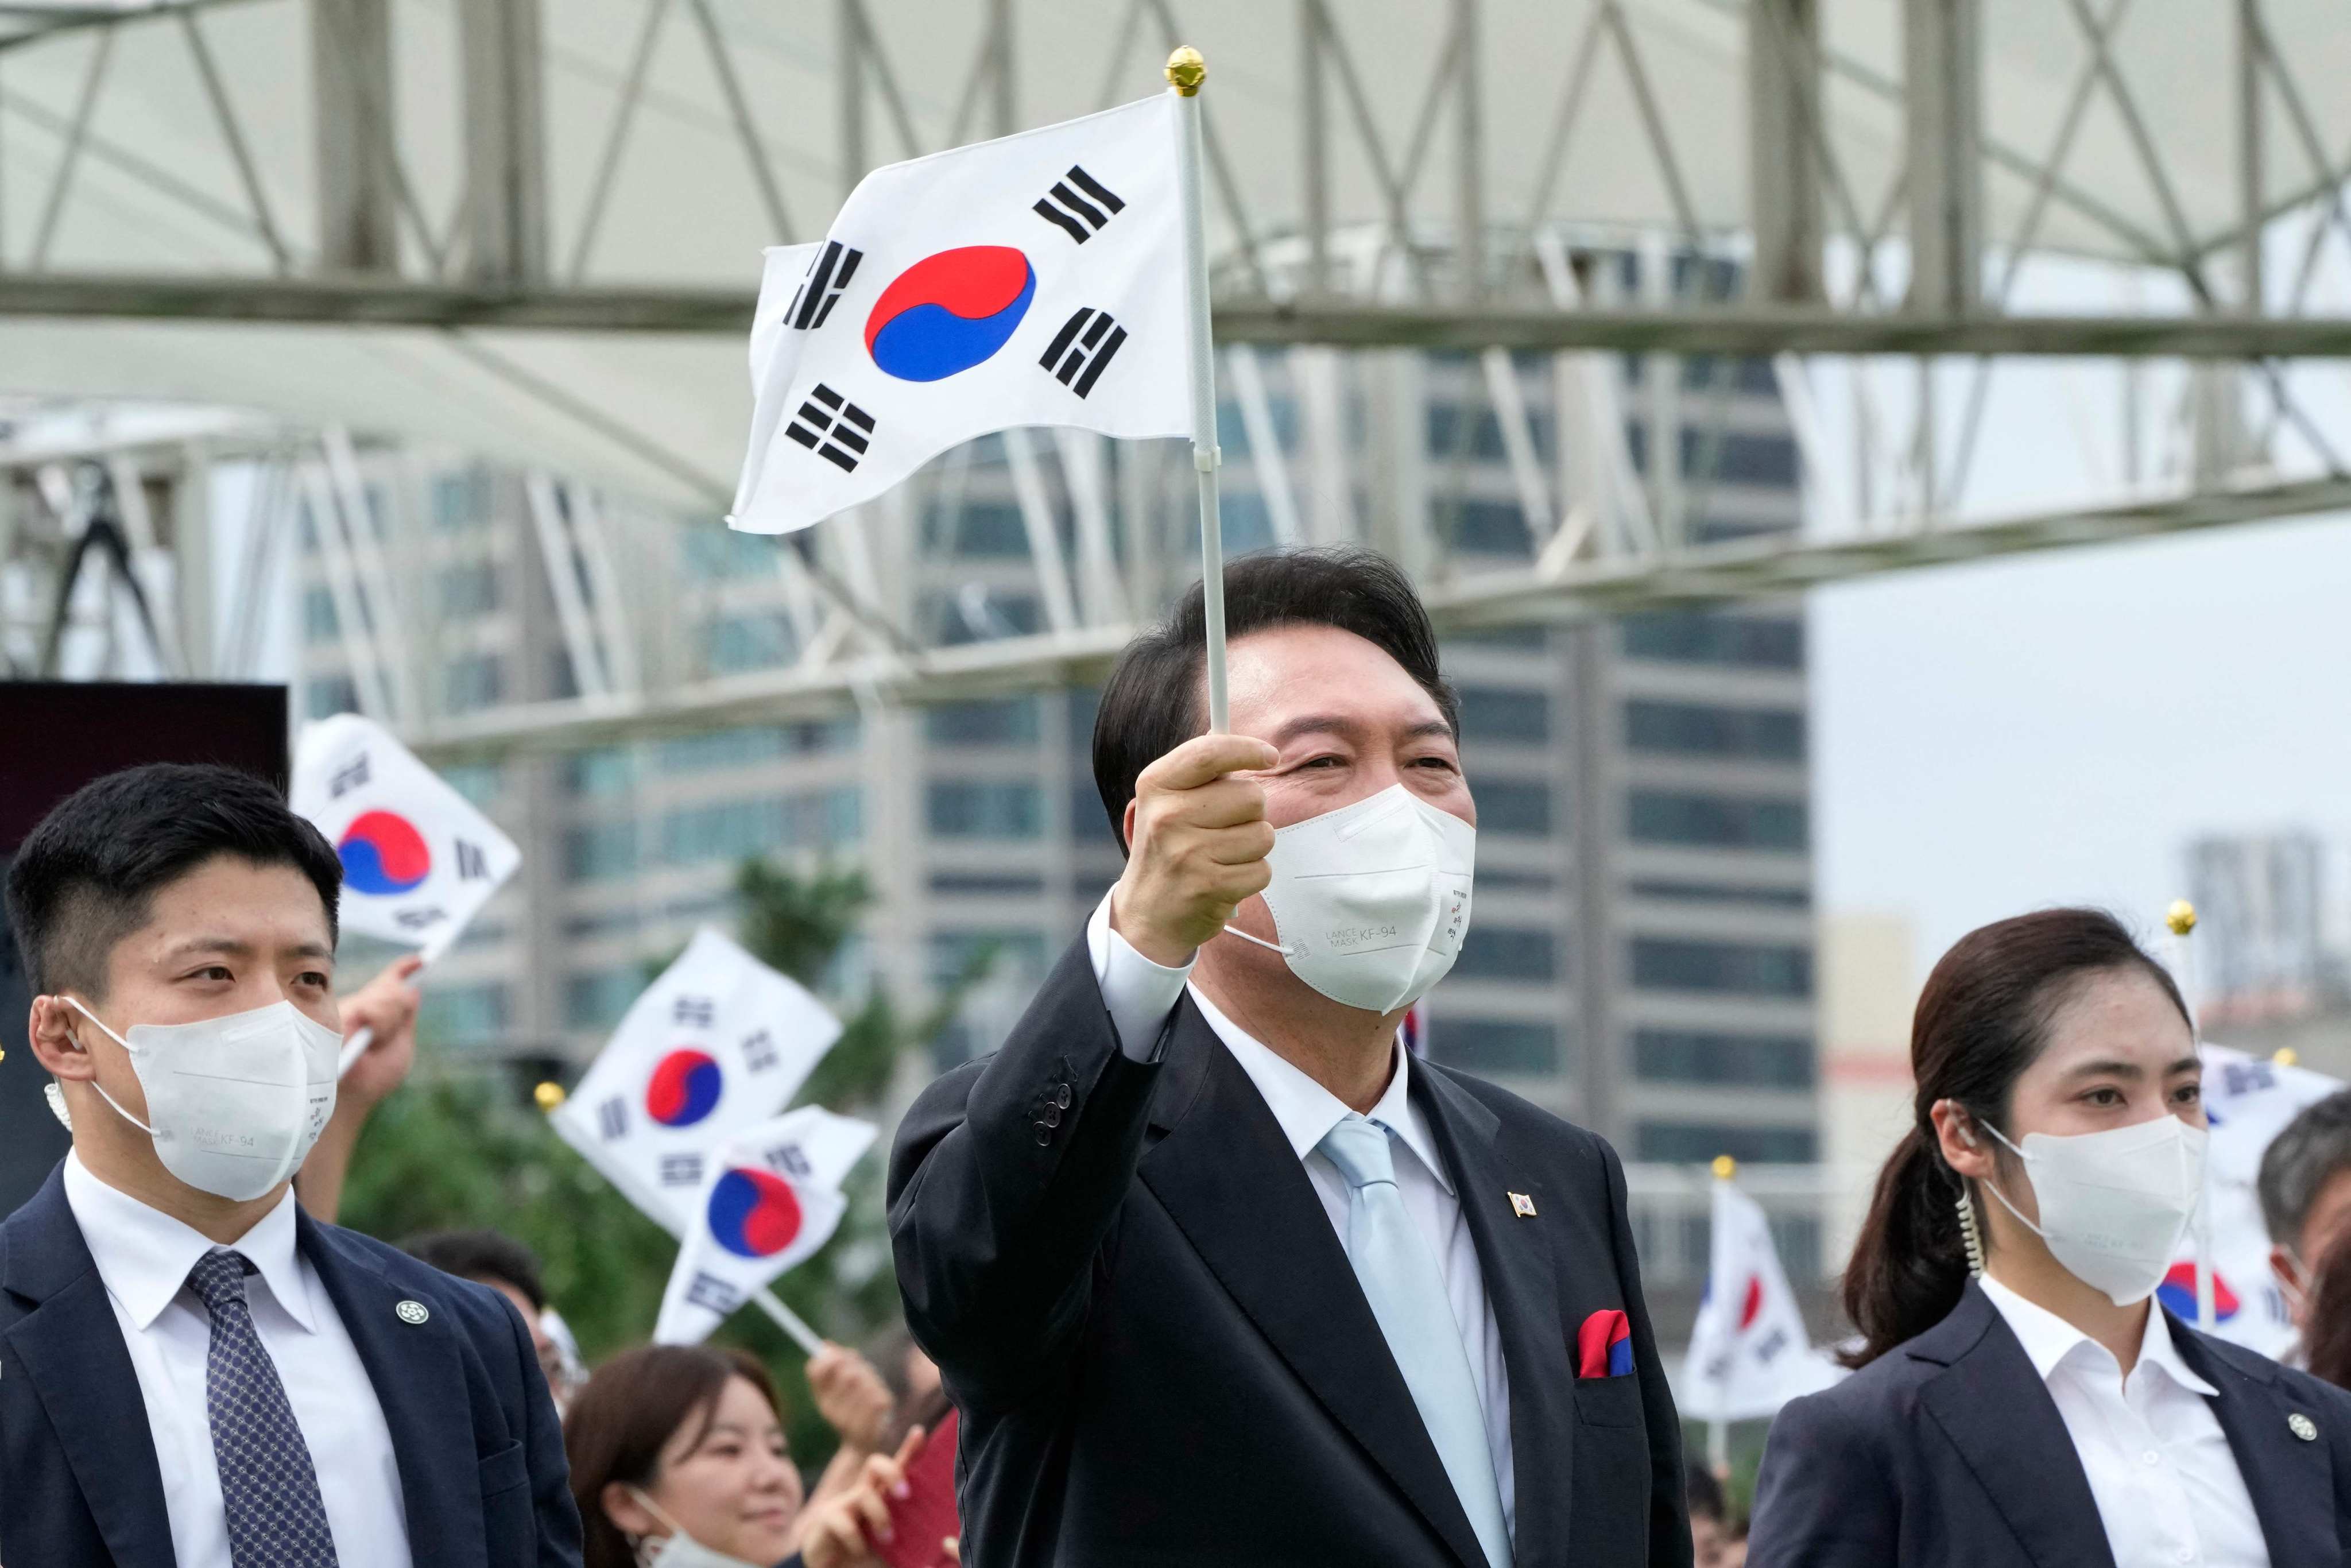 President Yoon Suk-yeol waves a South Korean flag during a ceremony in Seoul on Monday to mark Korean Liberation Day. Photo: AFP